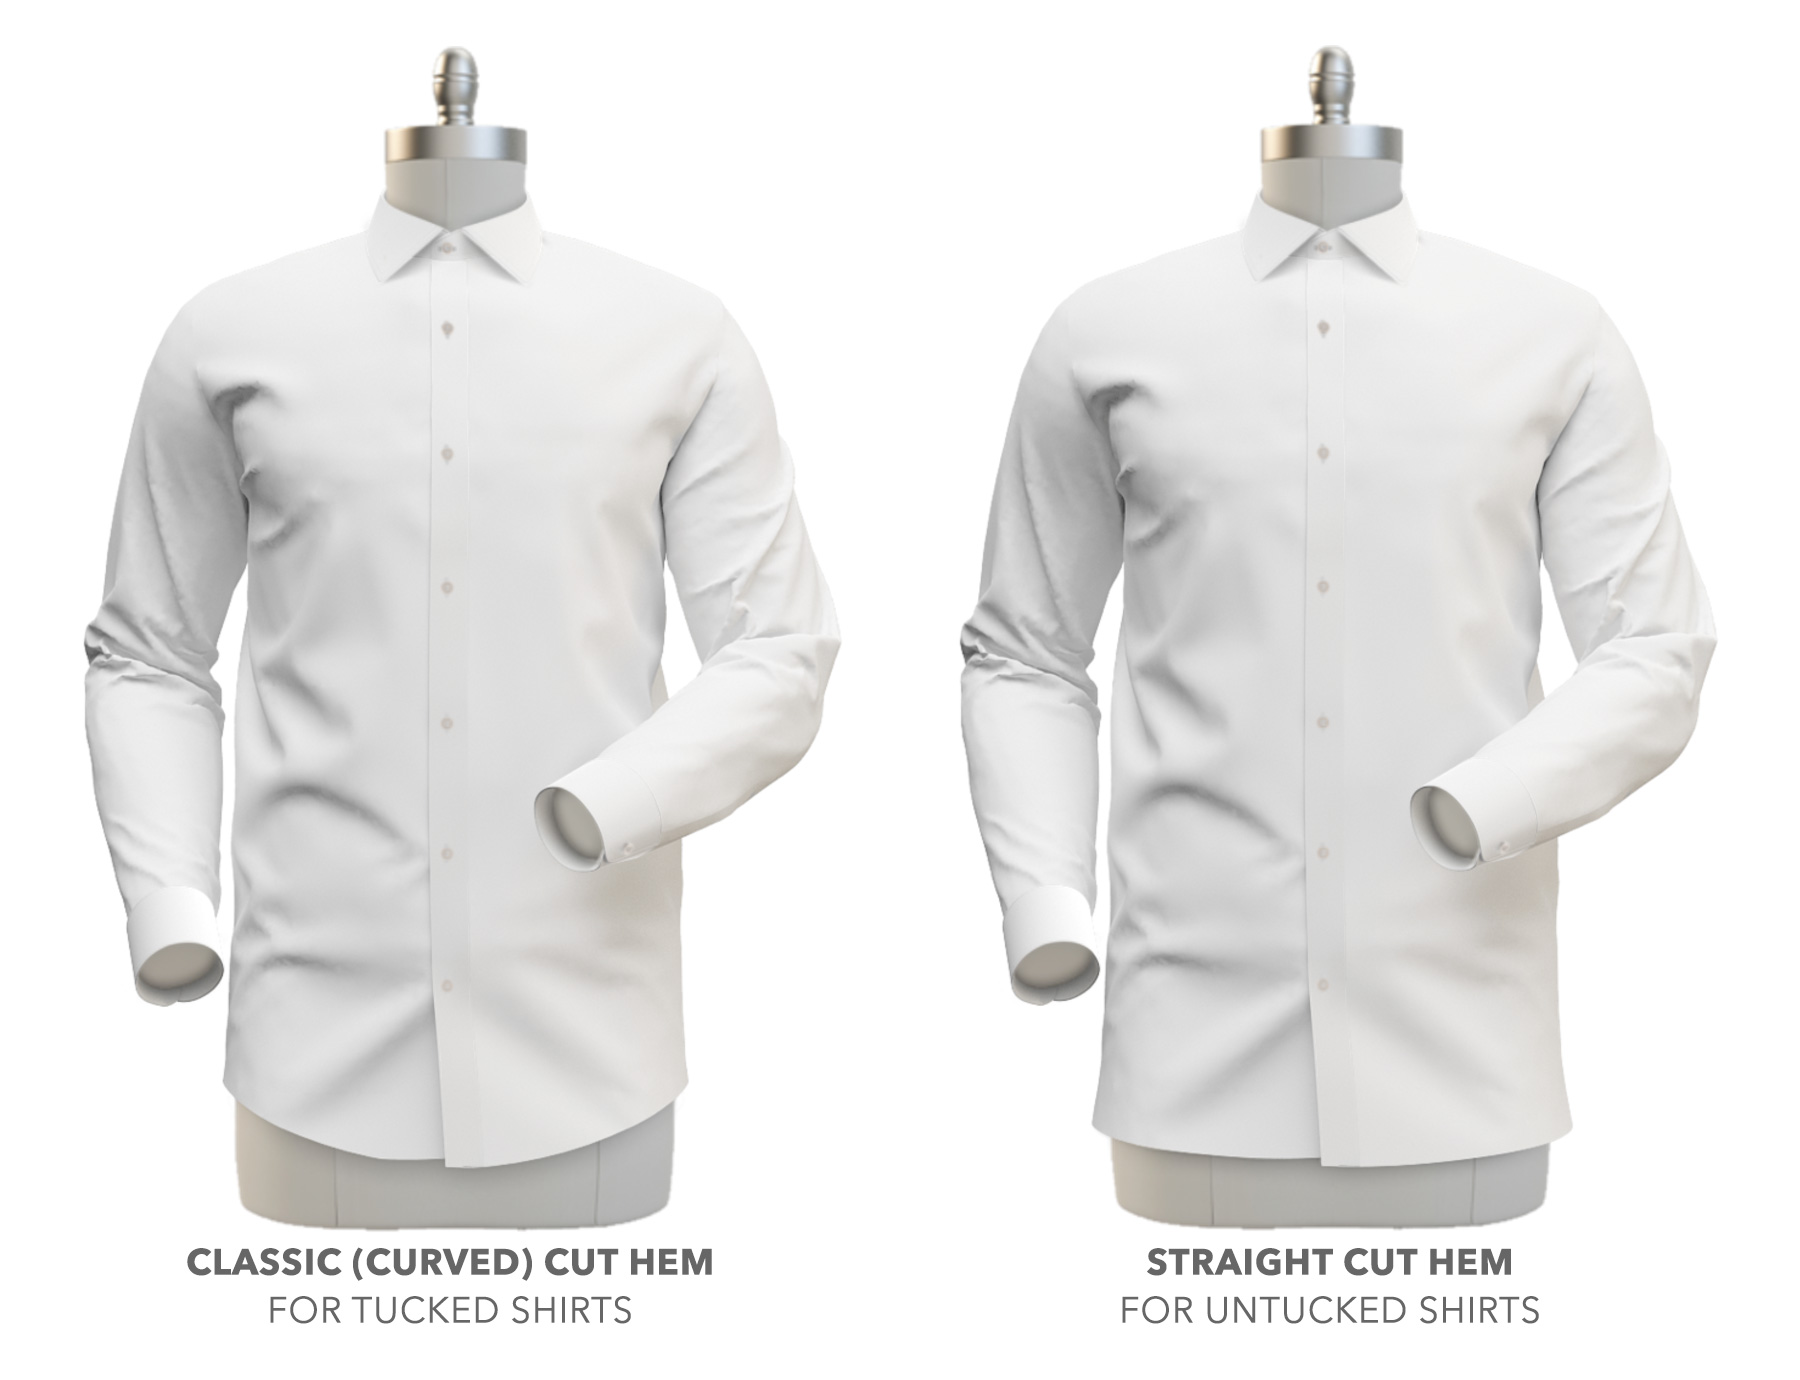 Deoveritas: Untucked vs. Tucked: How to Achieve the Perfect Shirt